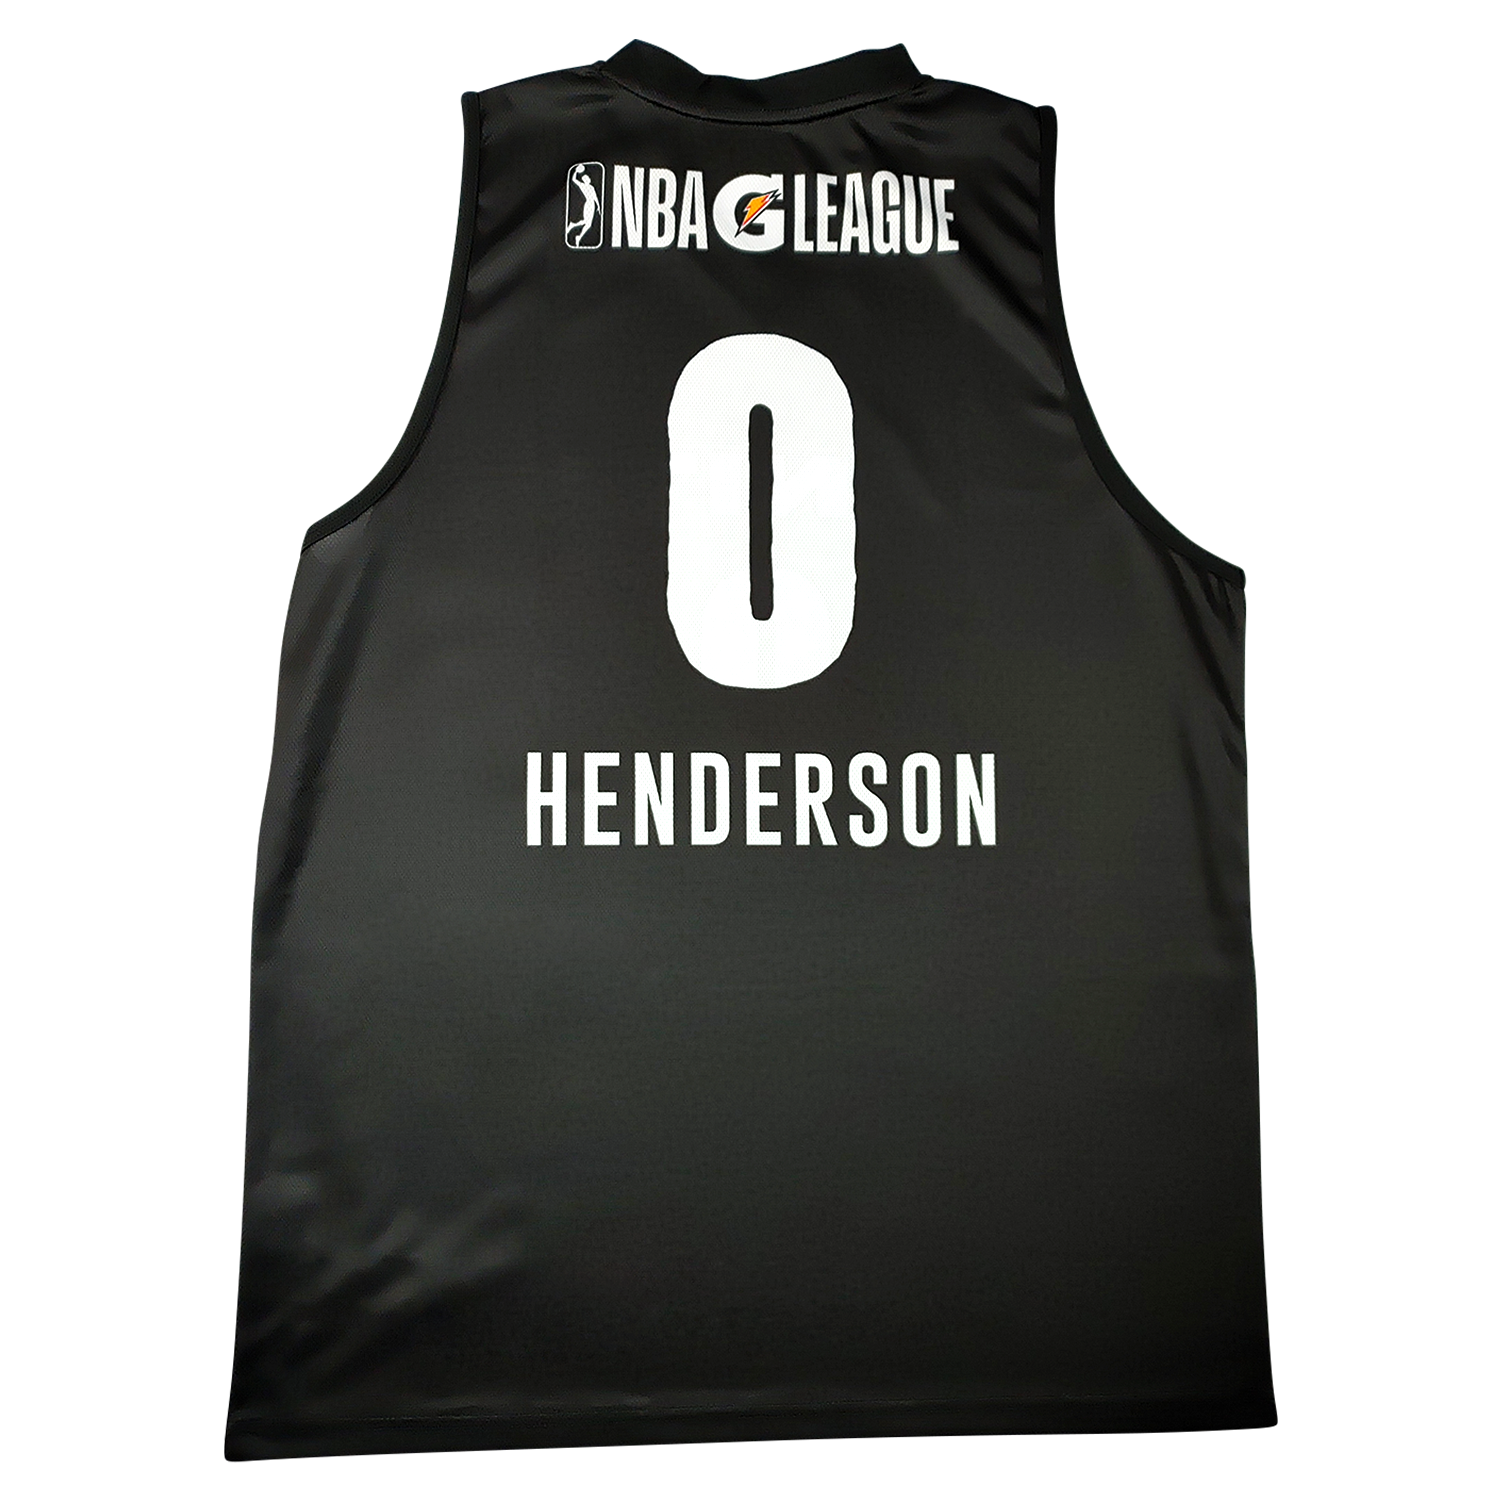 He should take the 0 from dame - Scoot Henderson's jersey number creates  buzz among NBA fans